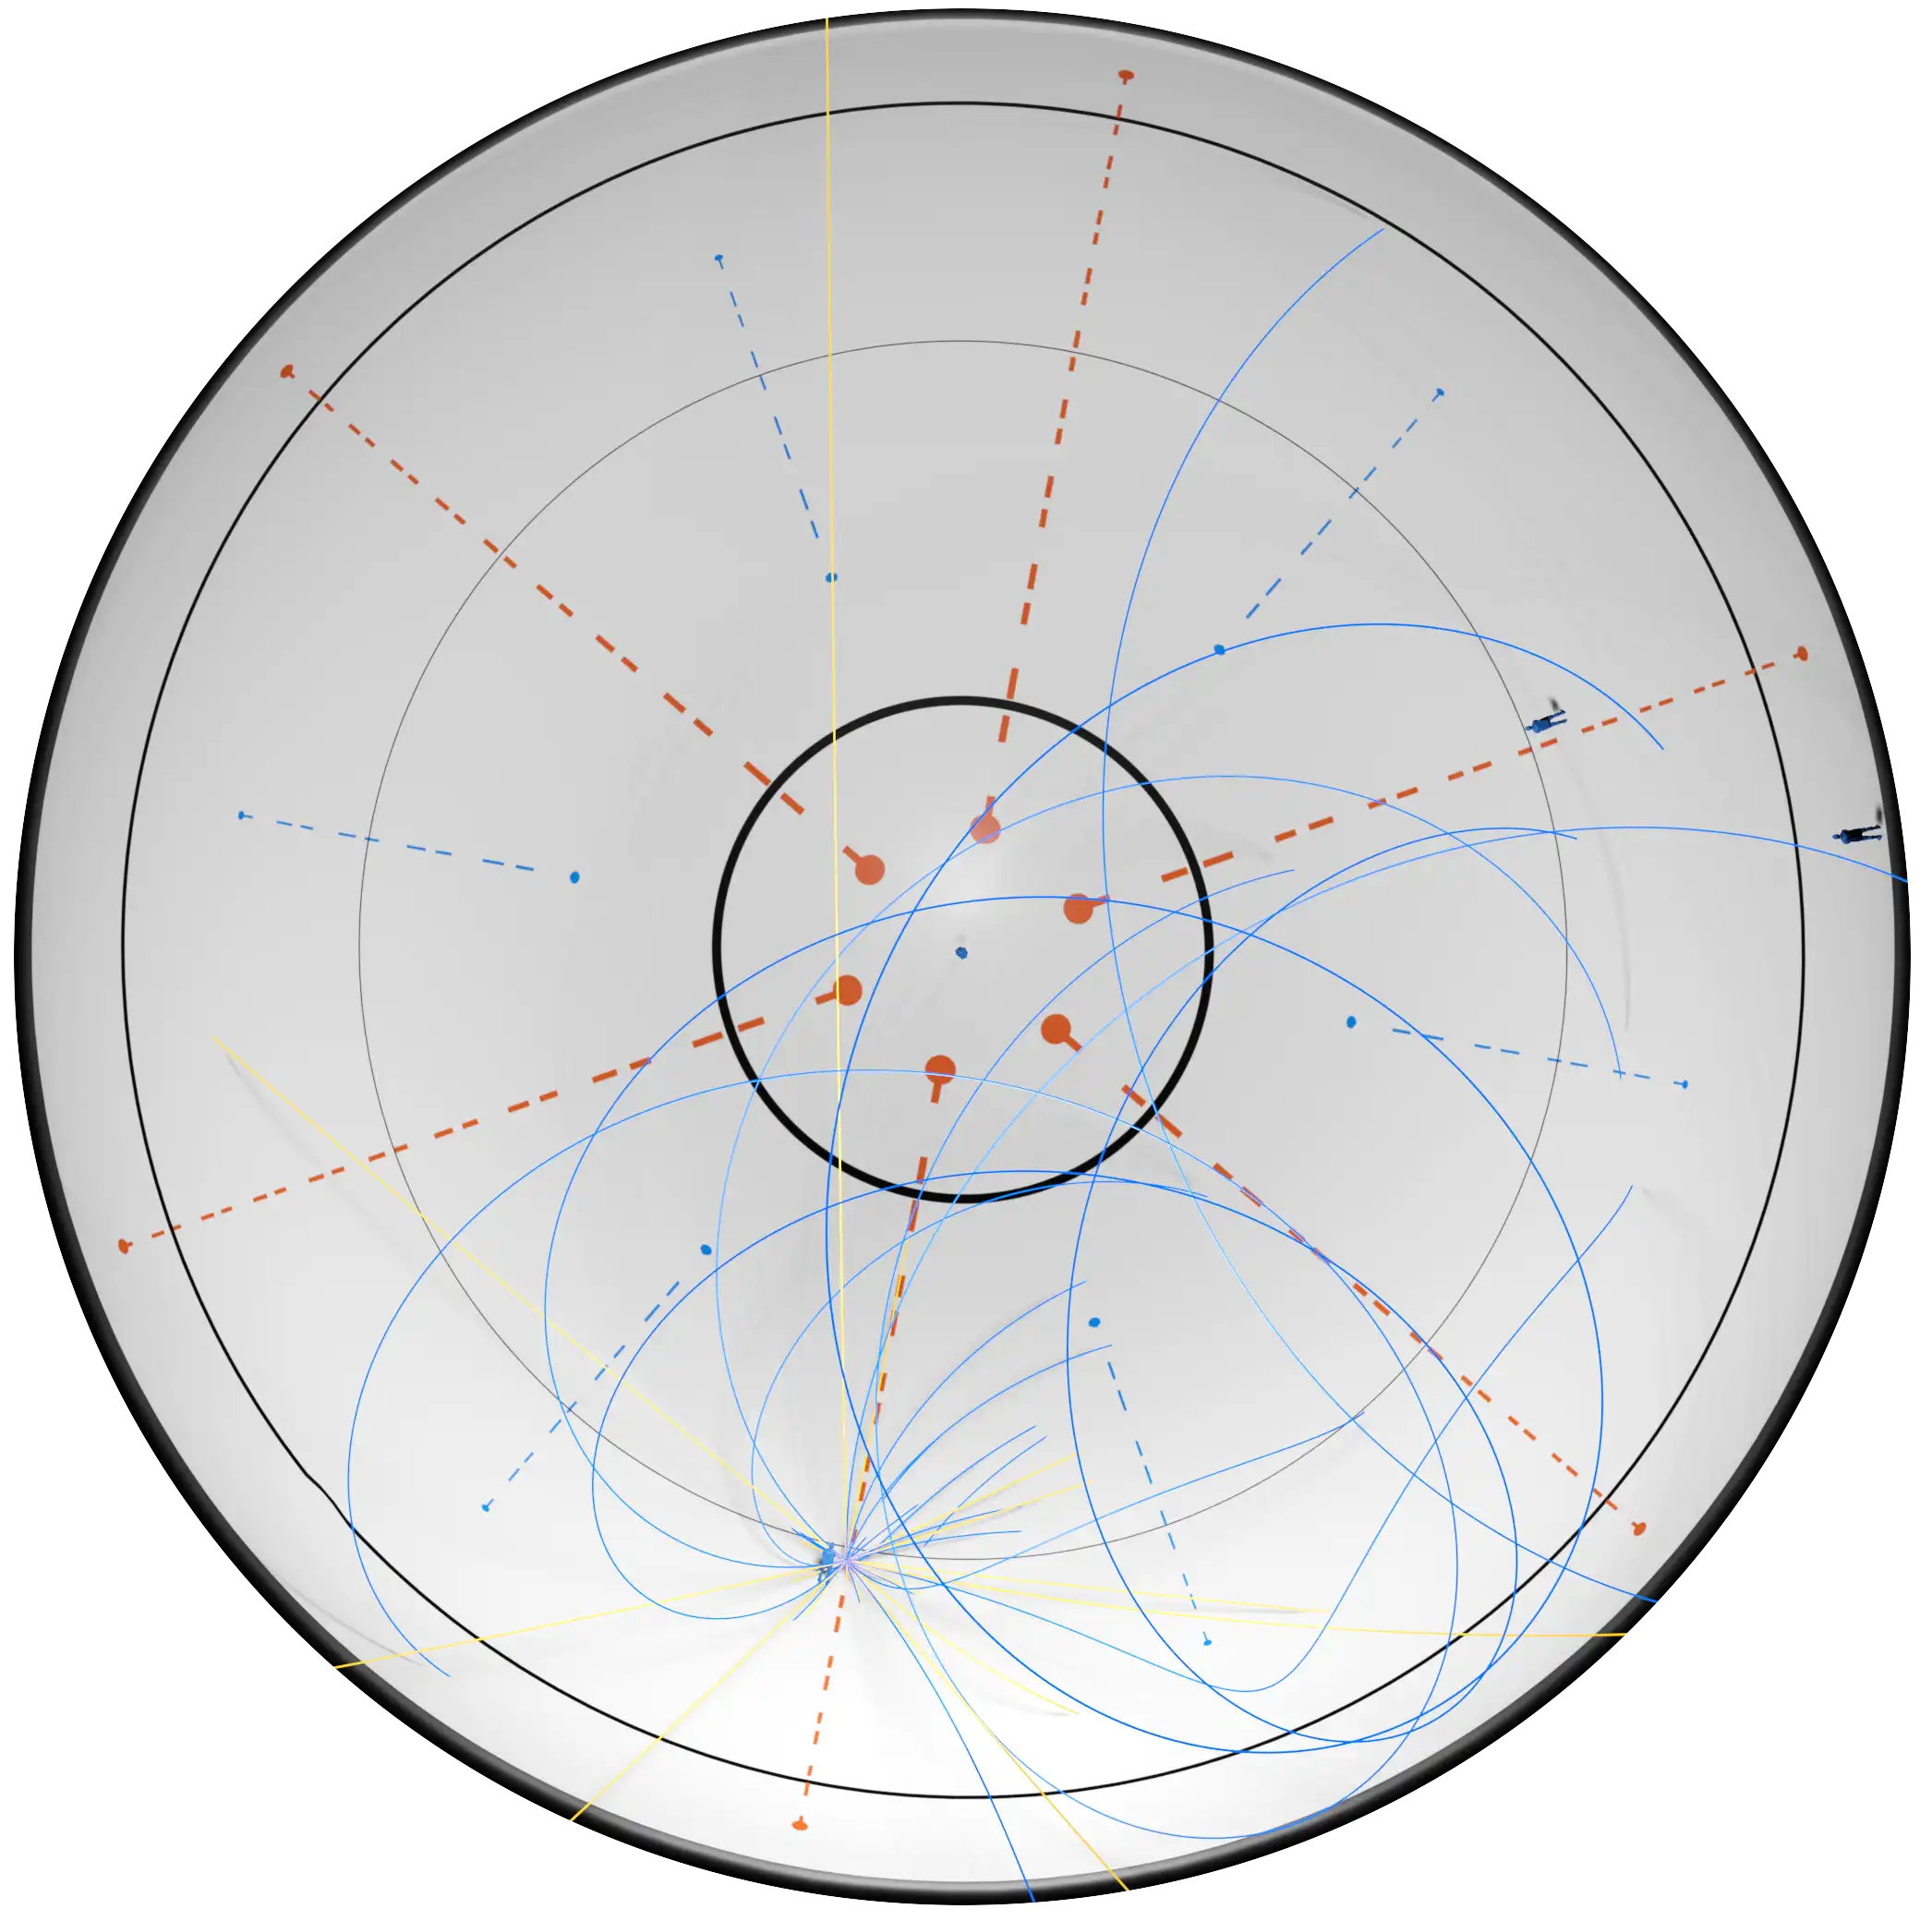  2. A random set of simulated trajectories for fixed (yellow) and rotating (blue) frames of reference.